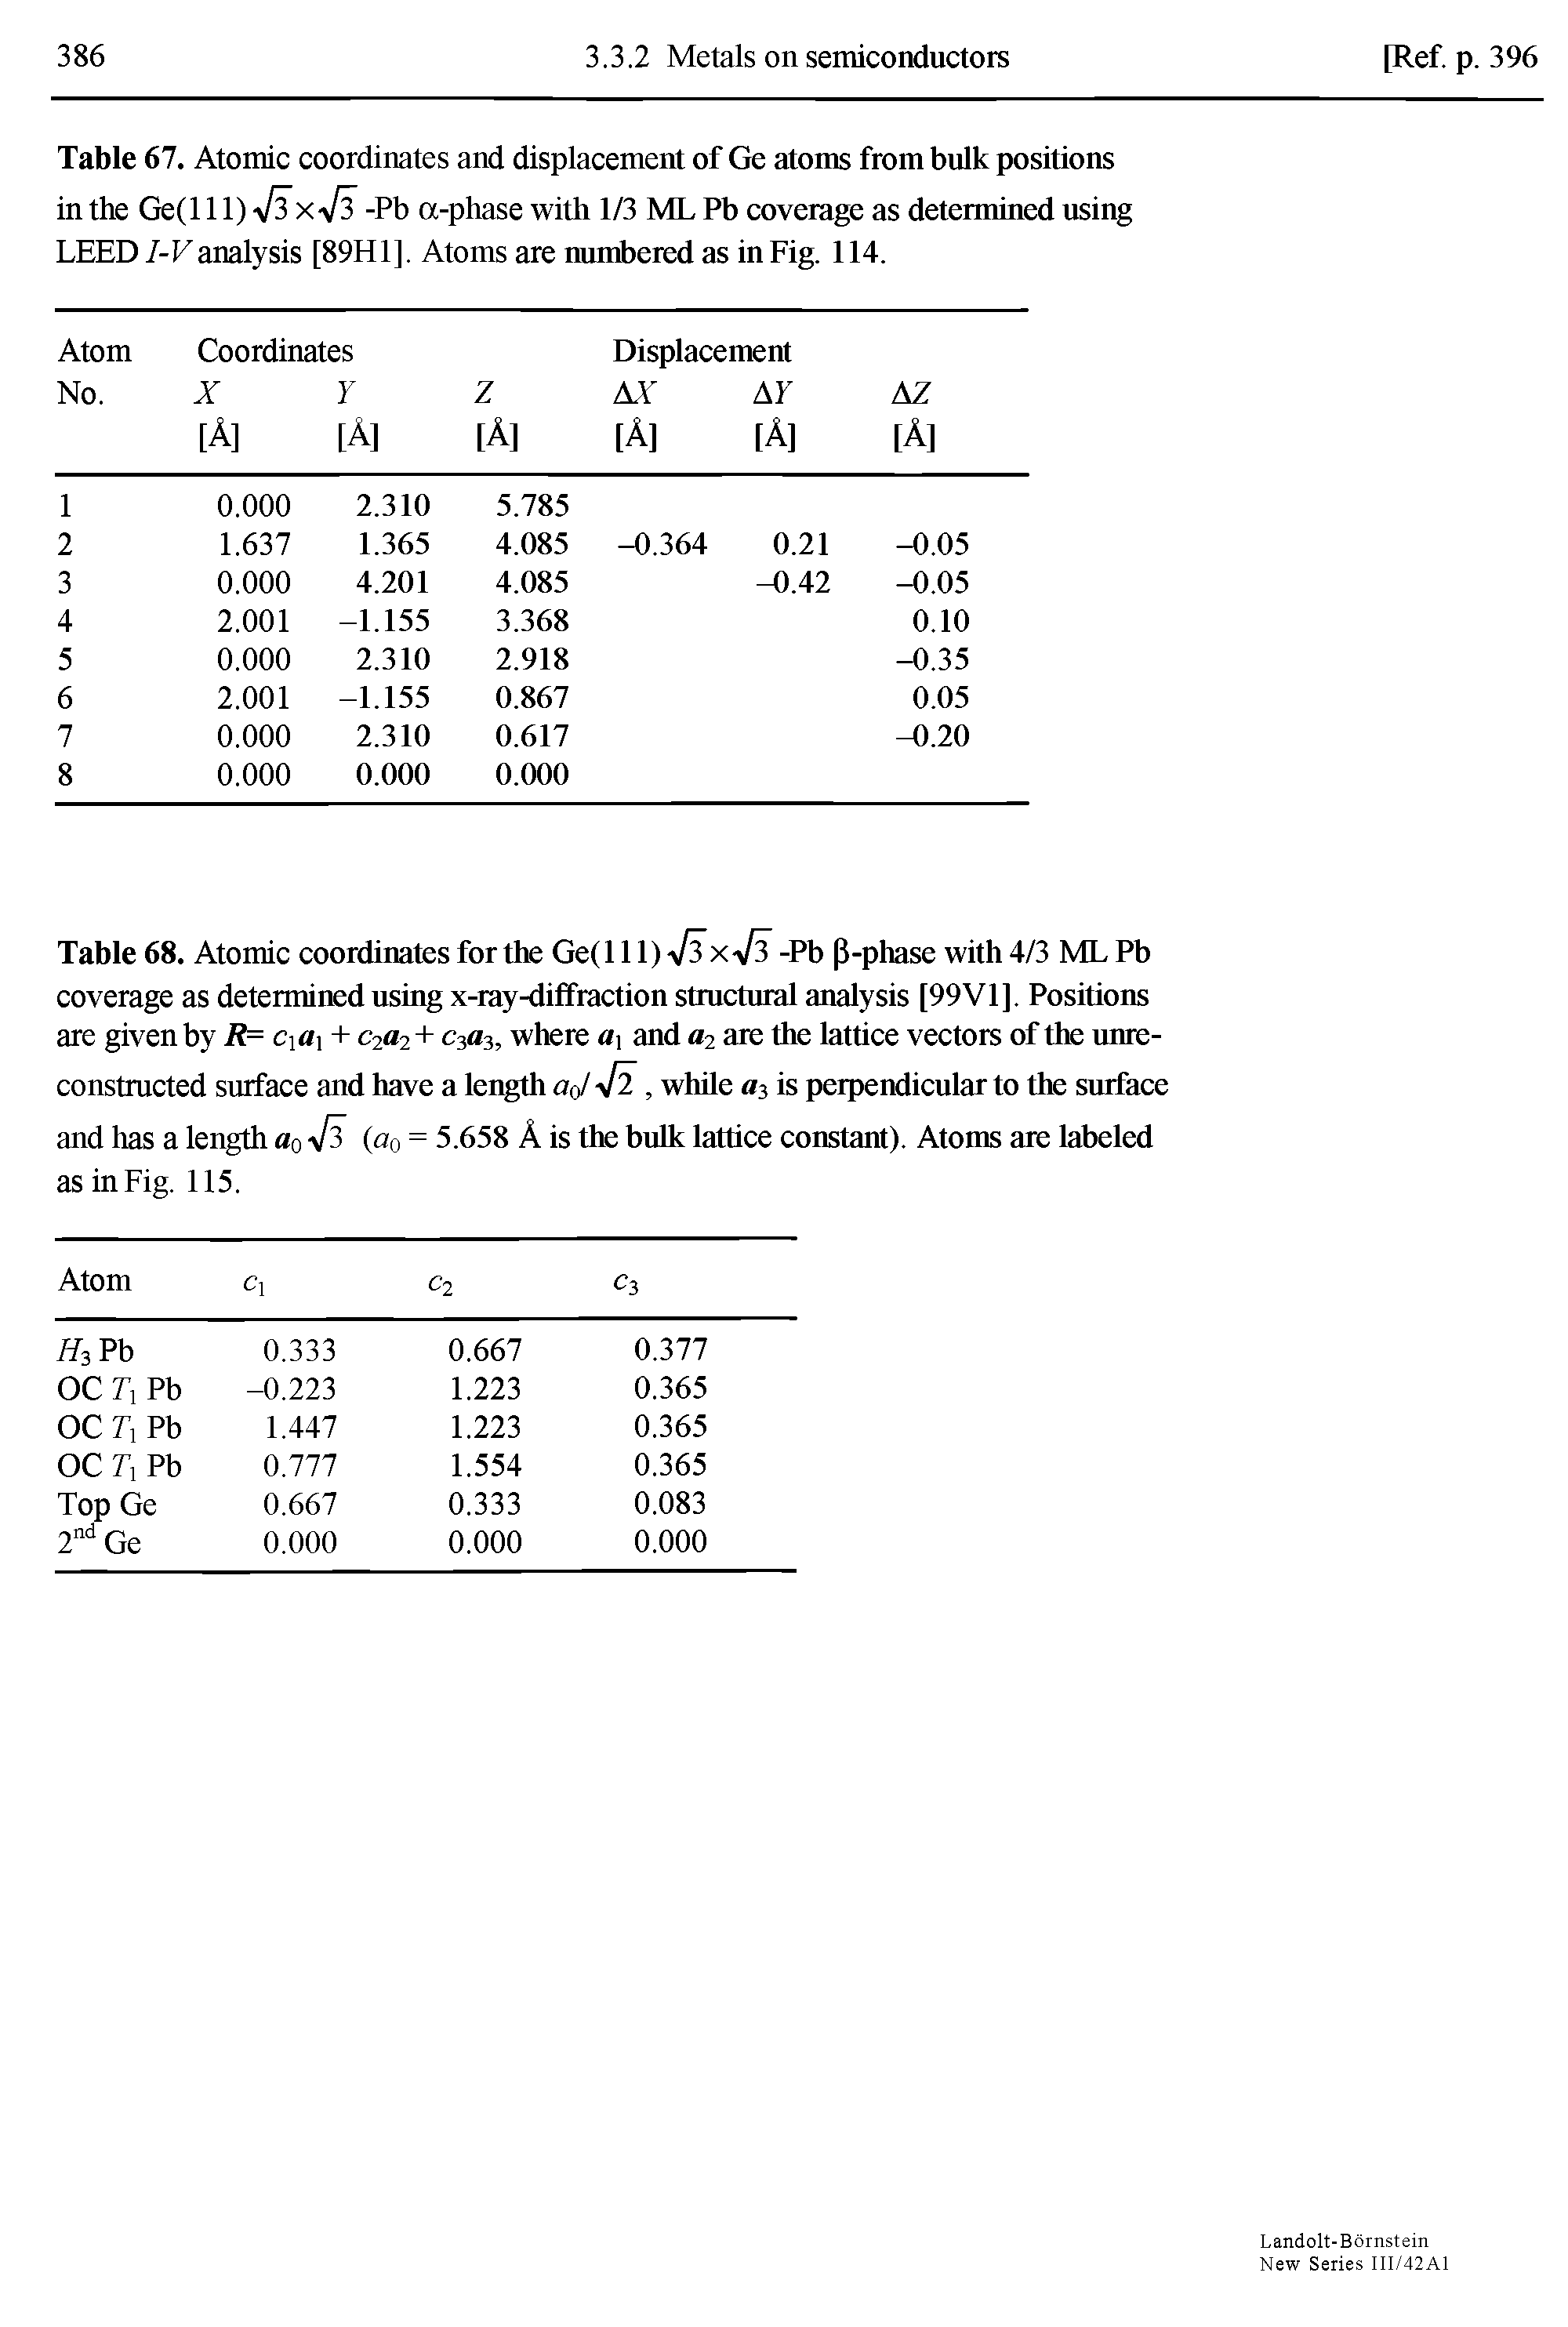 Table 67. Atomic coordinates and displacement of Ge atoms from bulk positions in the Ge(l 11) >/3 xVs -Pb a-phase with 1/3 ML Pb coverage as determined using LEED/-Fanalysis [89H1]. Atoms are numbered as in Fig. 114.